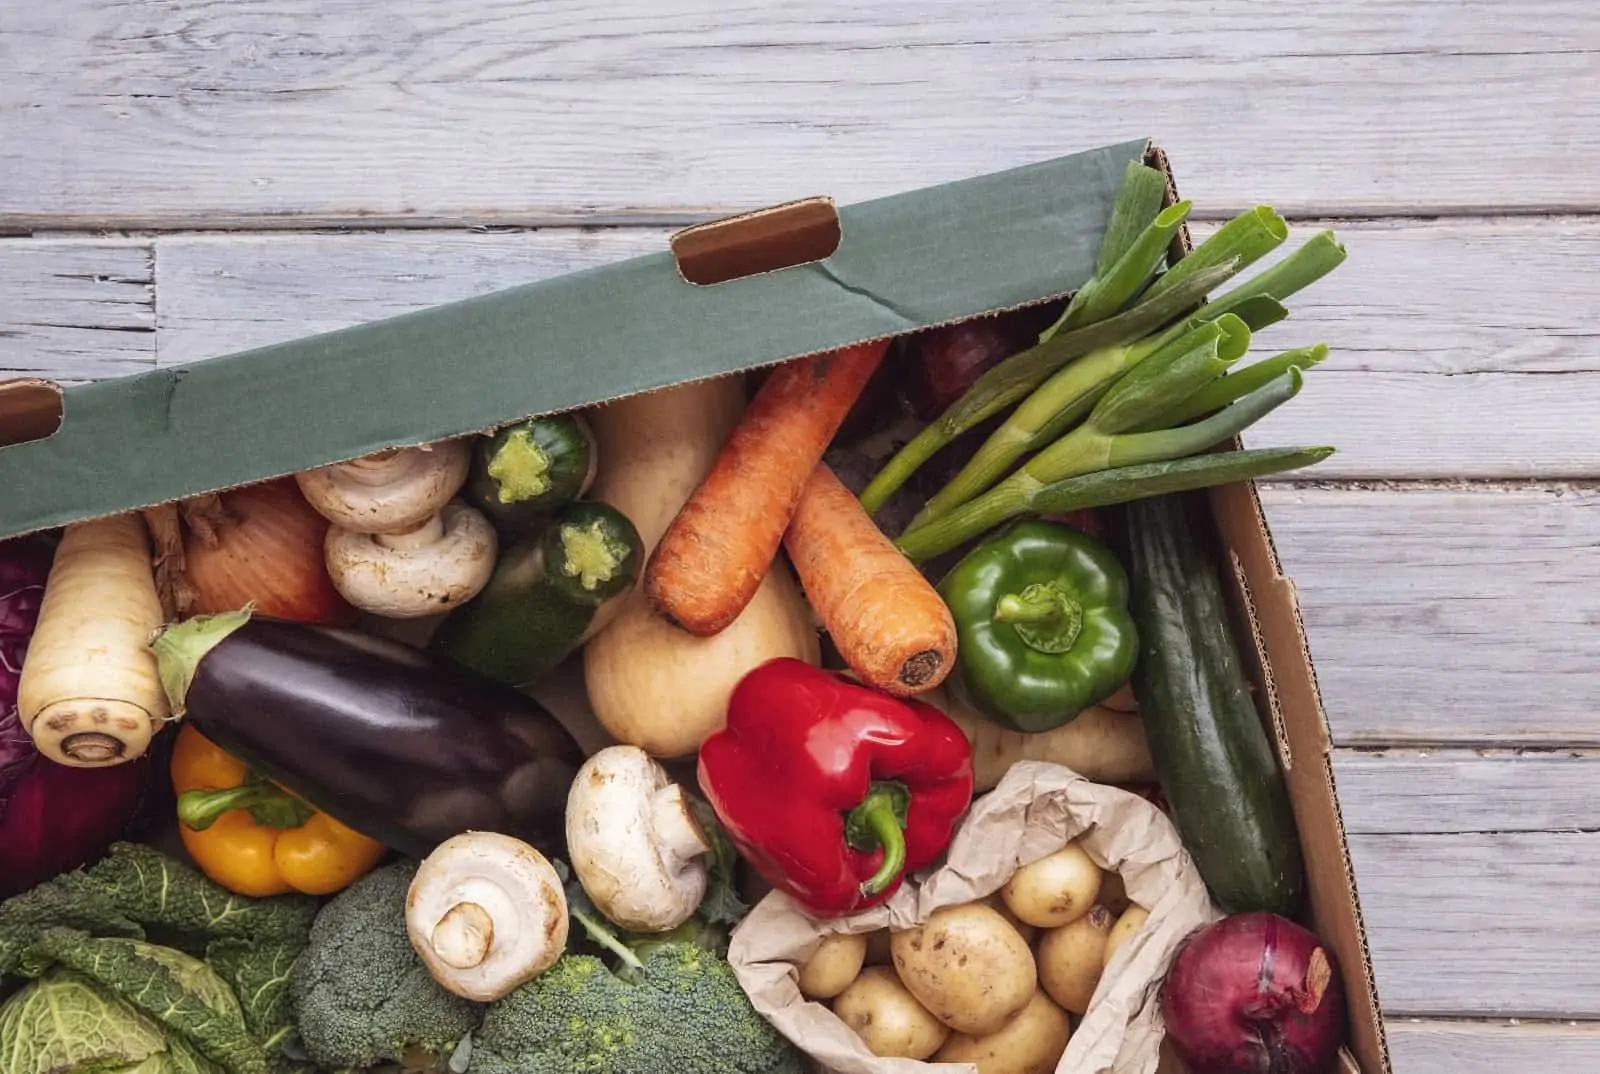 Instacart jobs: Variety of vegetables in a box